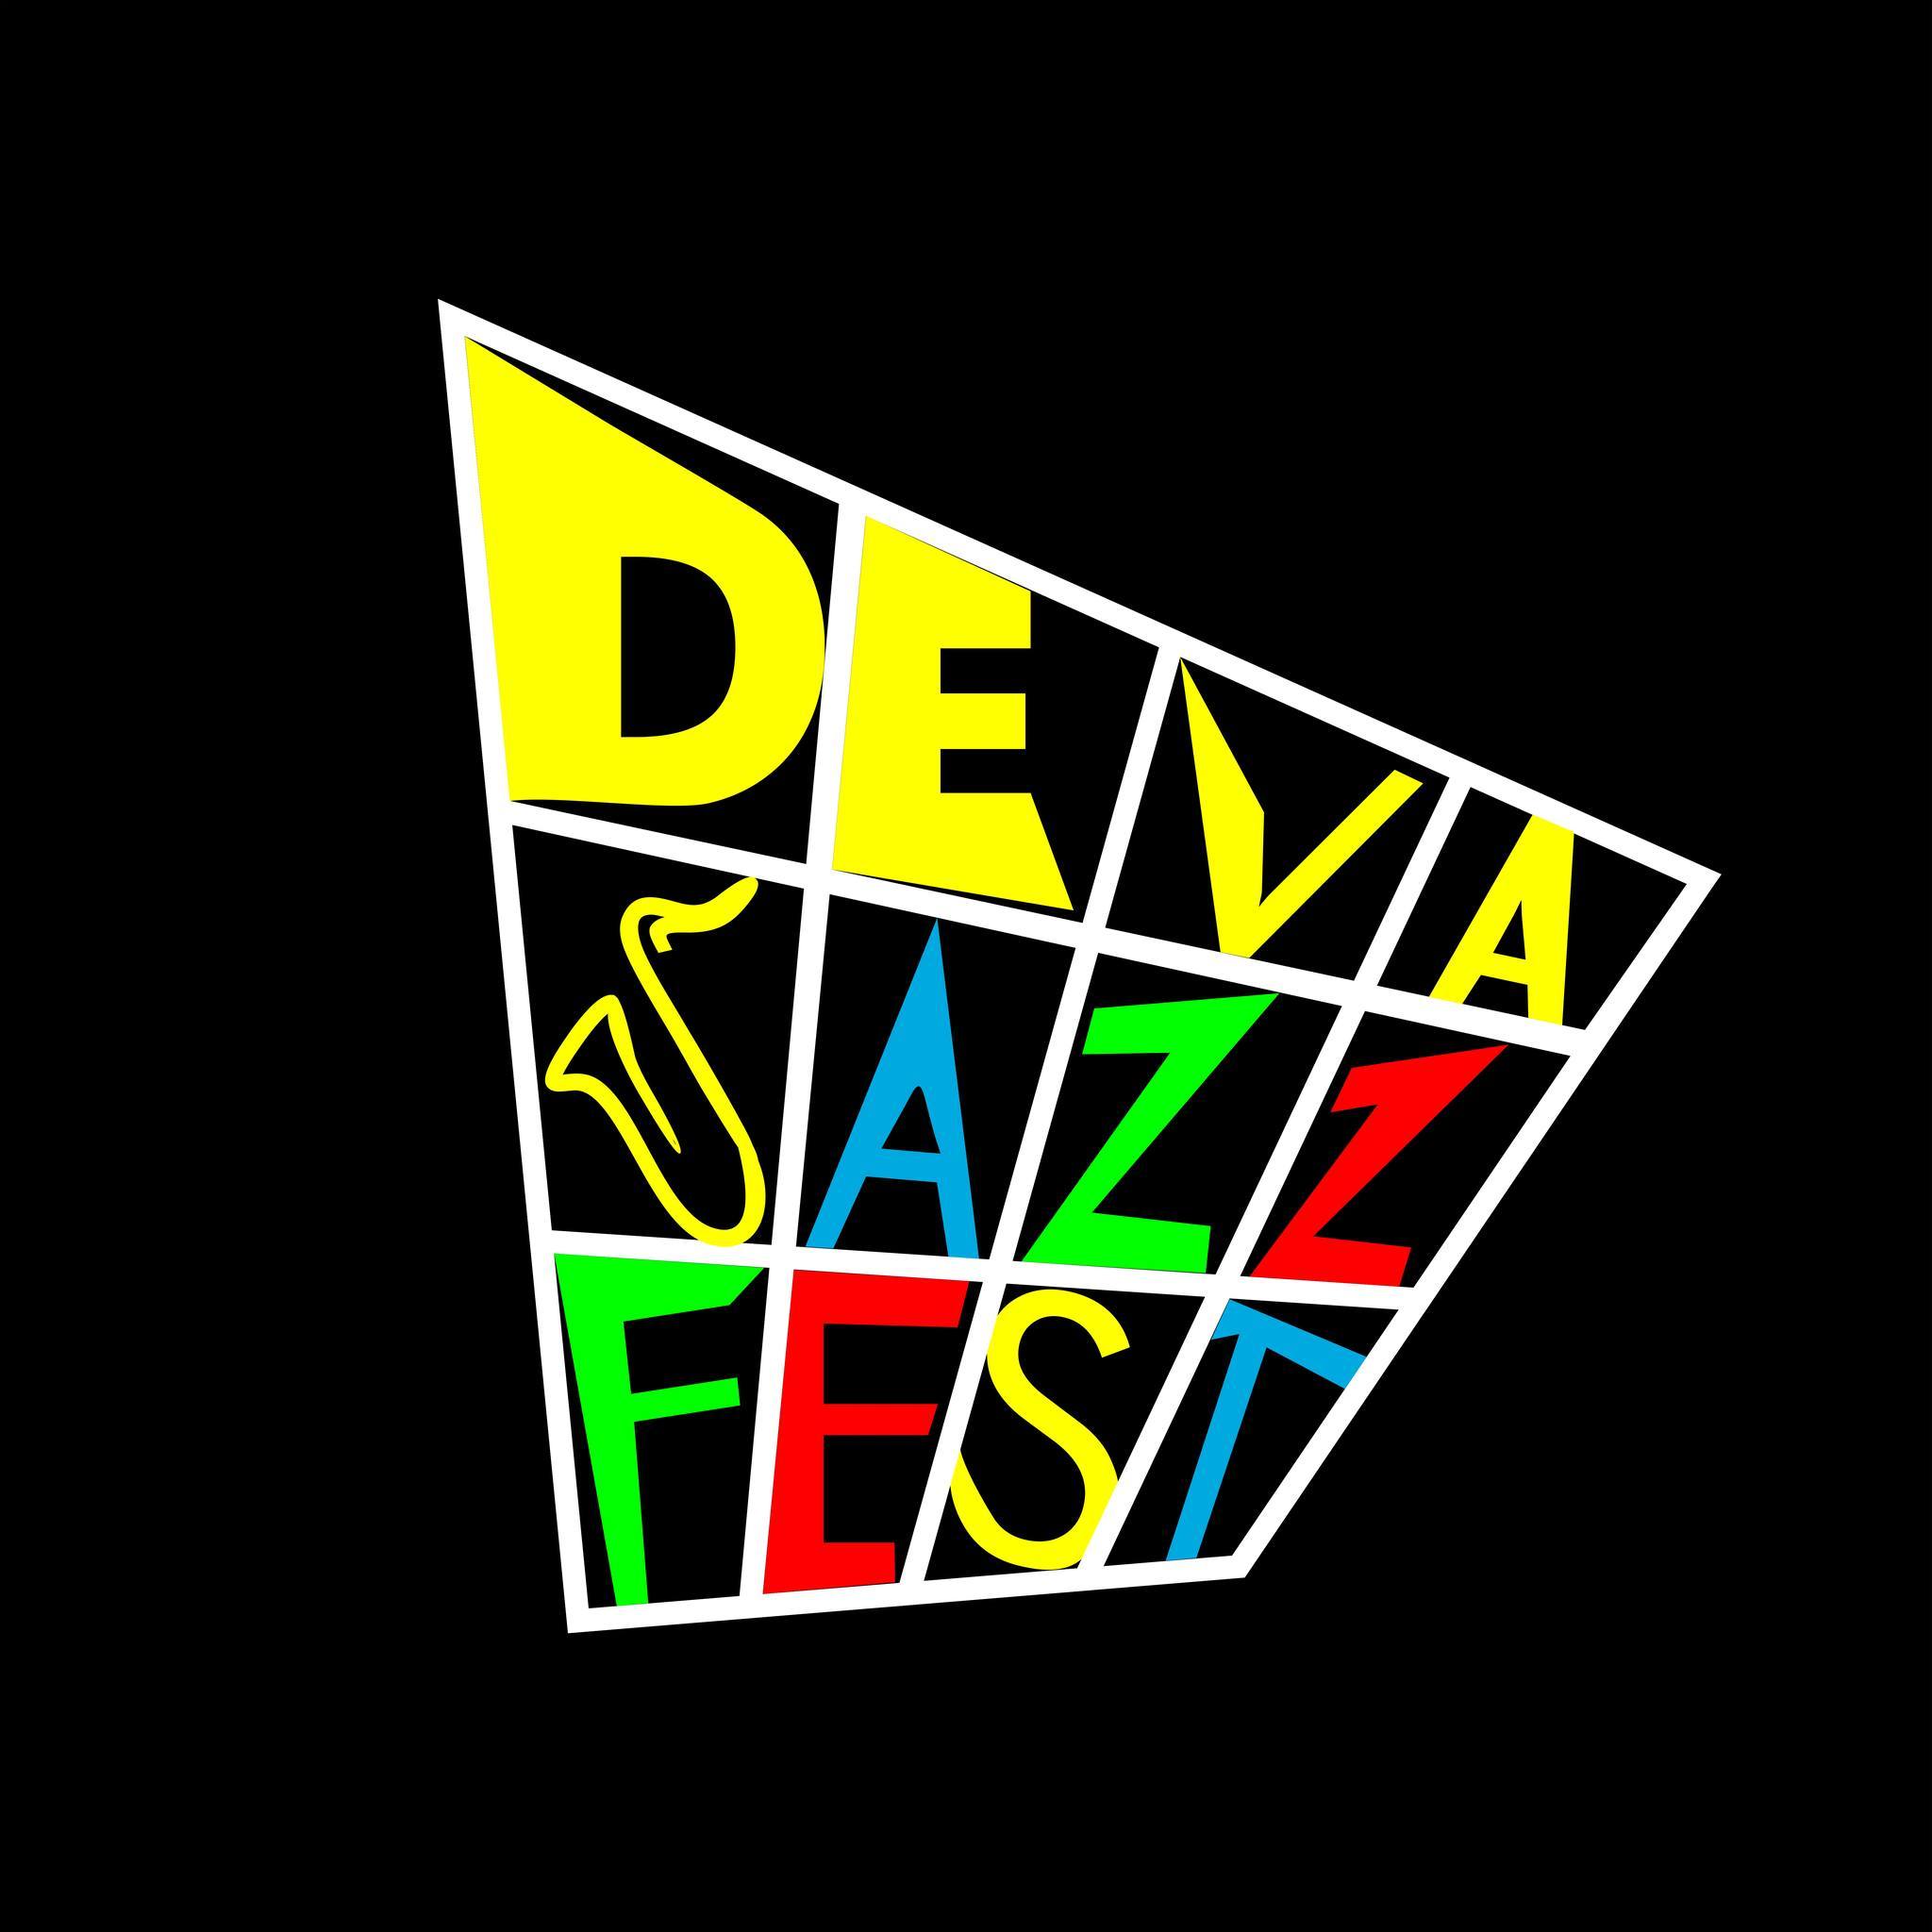 Deva Jazz Fest brings artists from US, Cuba and Europe to Romania